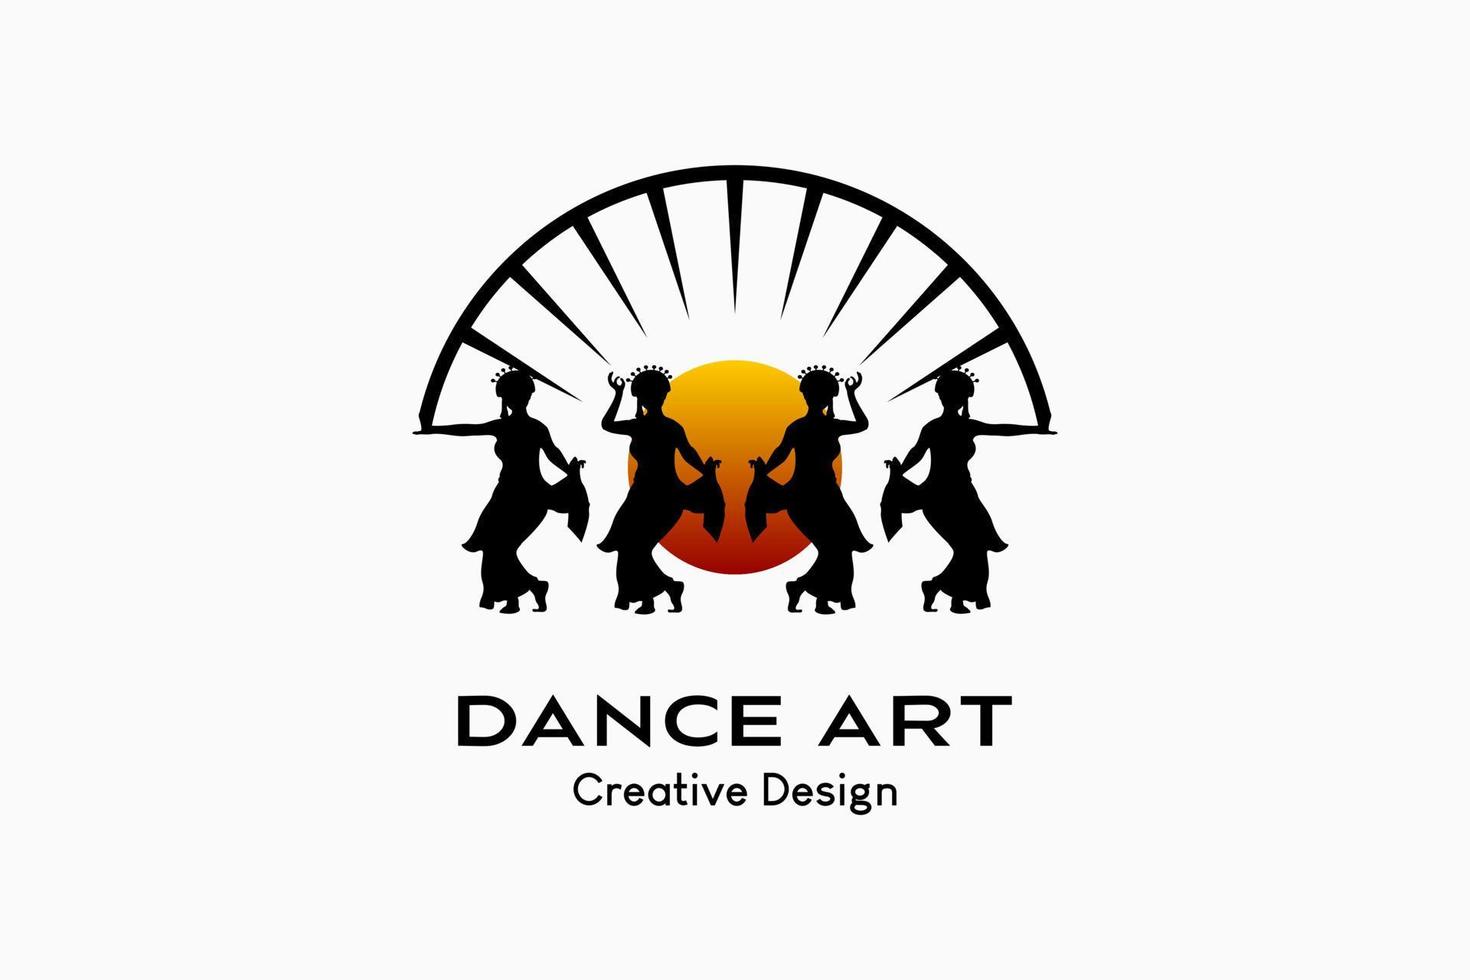 Dance group logo design in creative concept, silhouette of woman combined with sun or moon icon. Vector premium